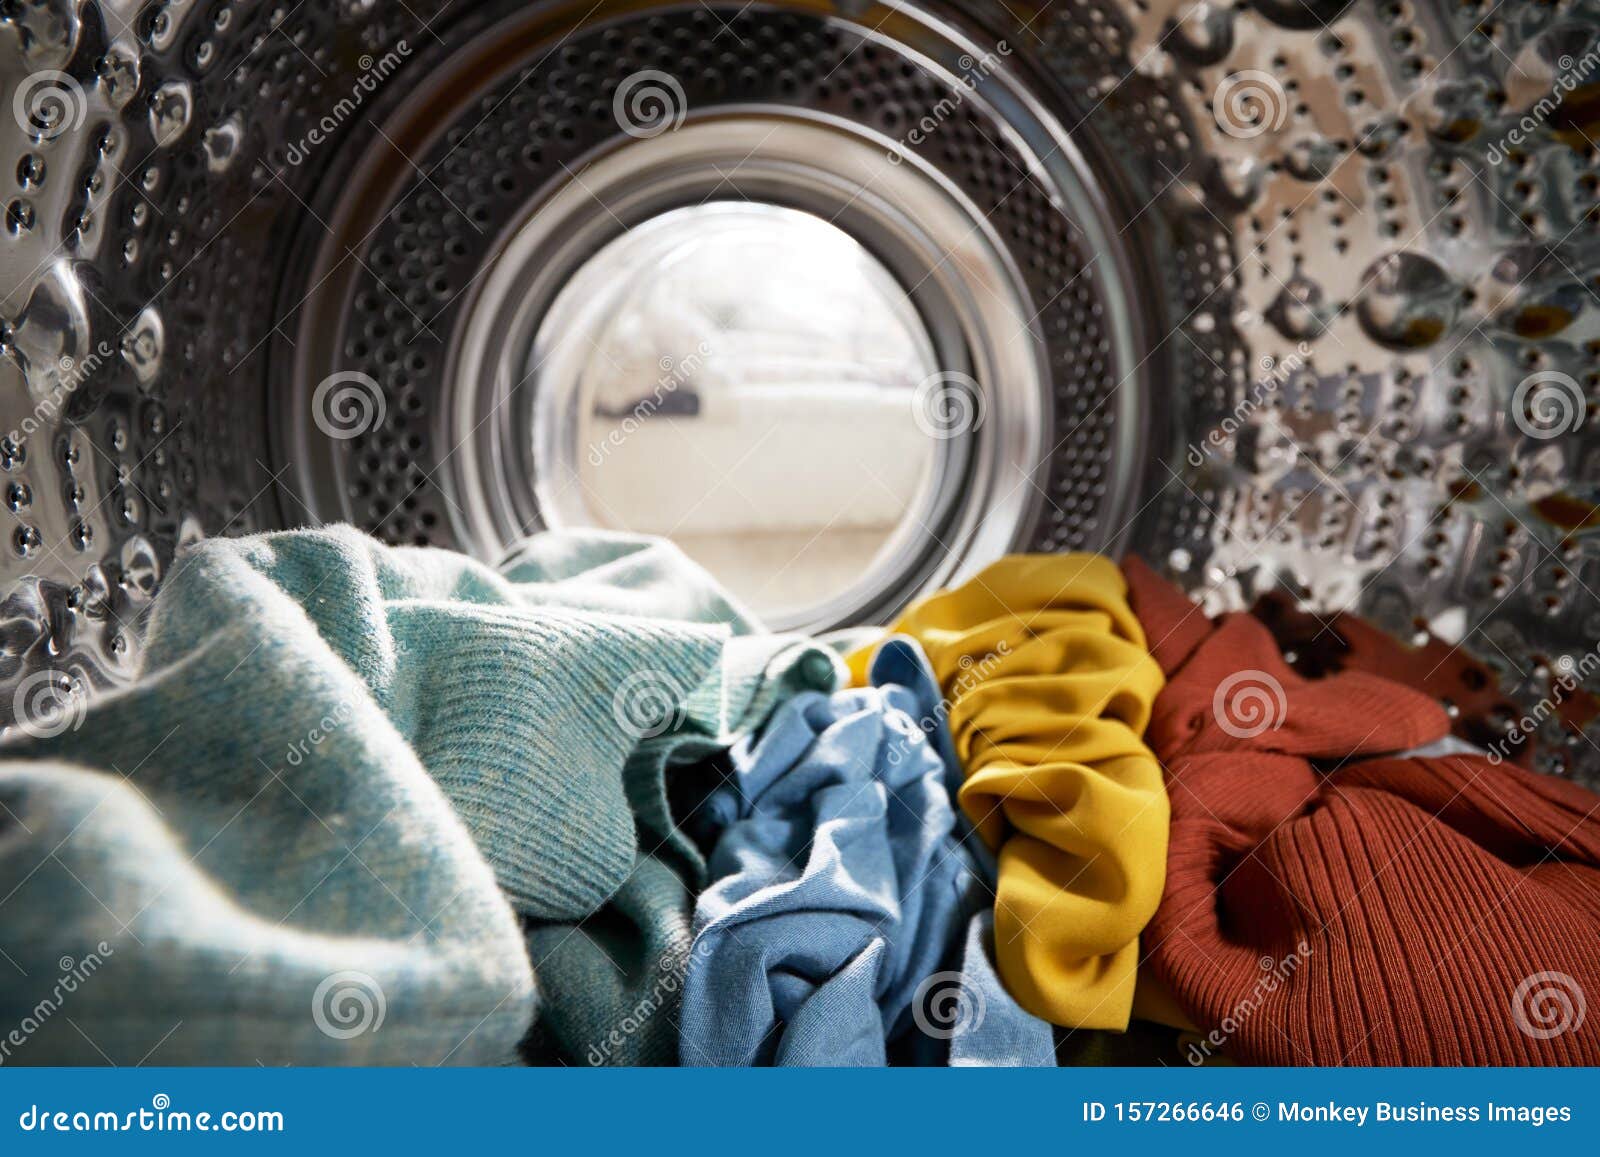 view looking out from inside washing machine filled with laundry